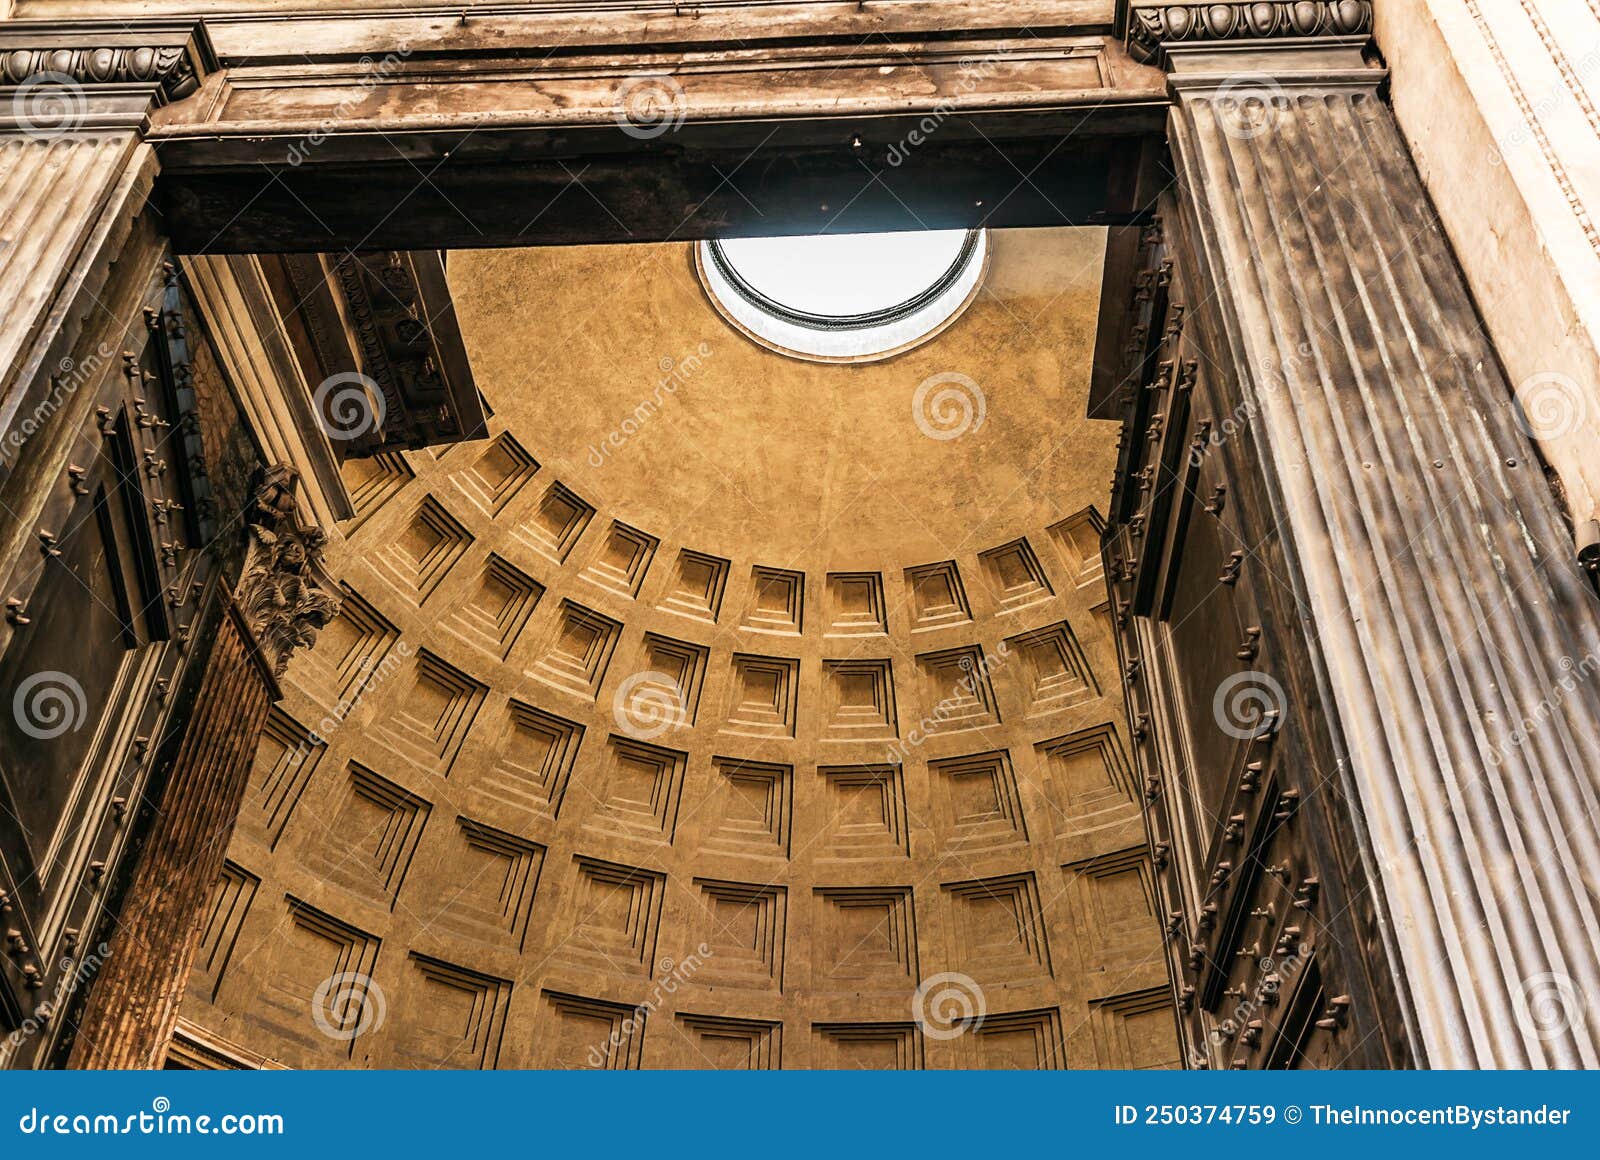 rome - entrance to the pantheon